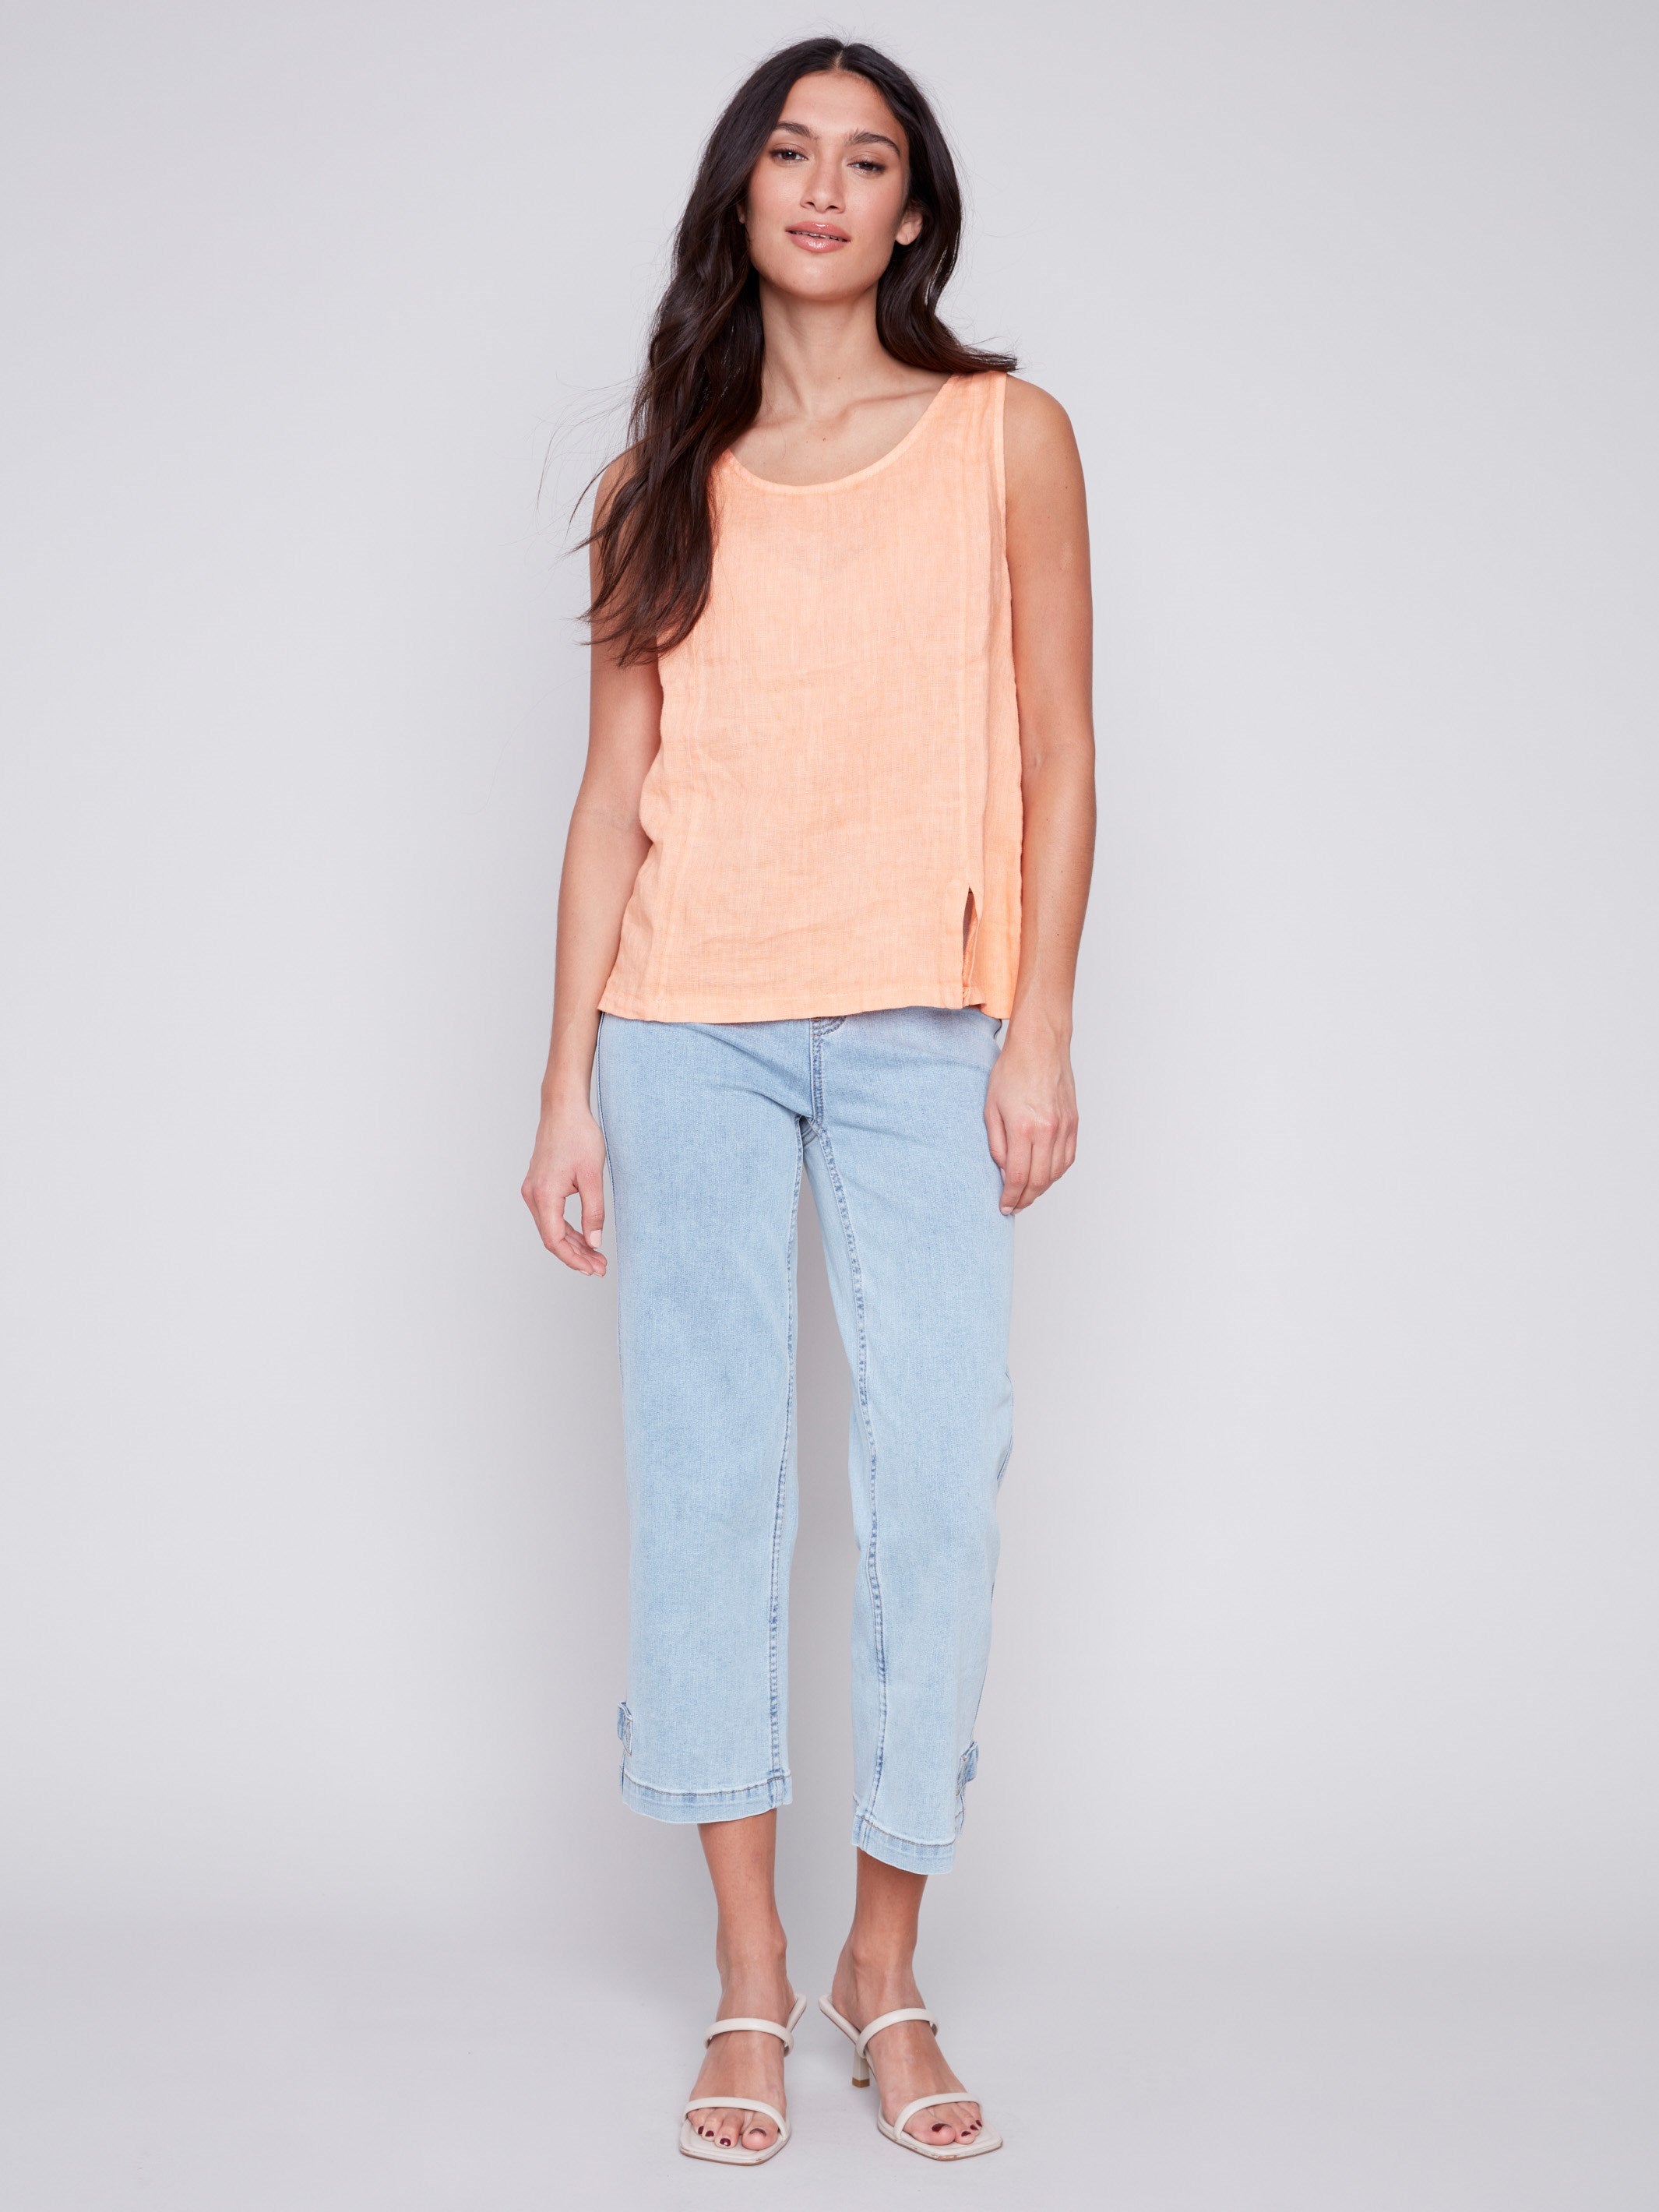 Sleeveless Linen Top with Slit - Tangerine - Charlie B Collection Canada - Image 2